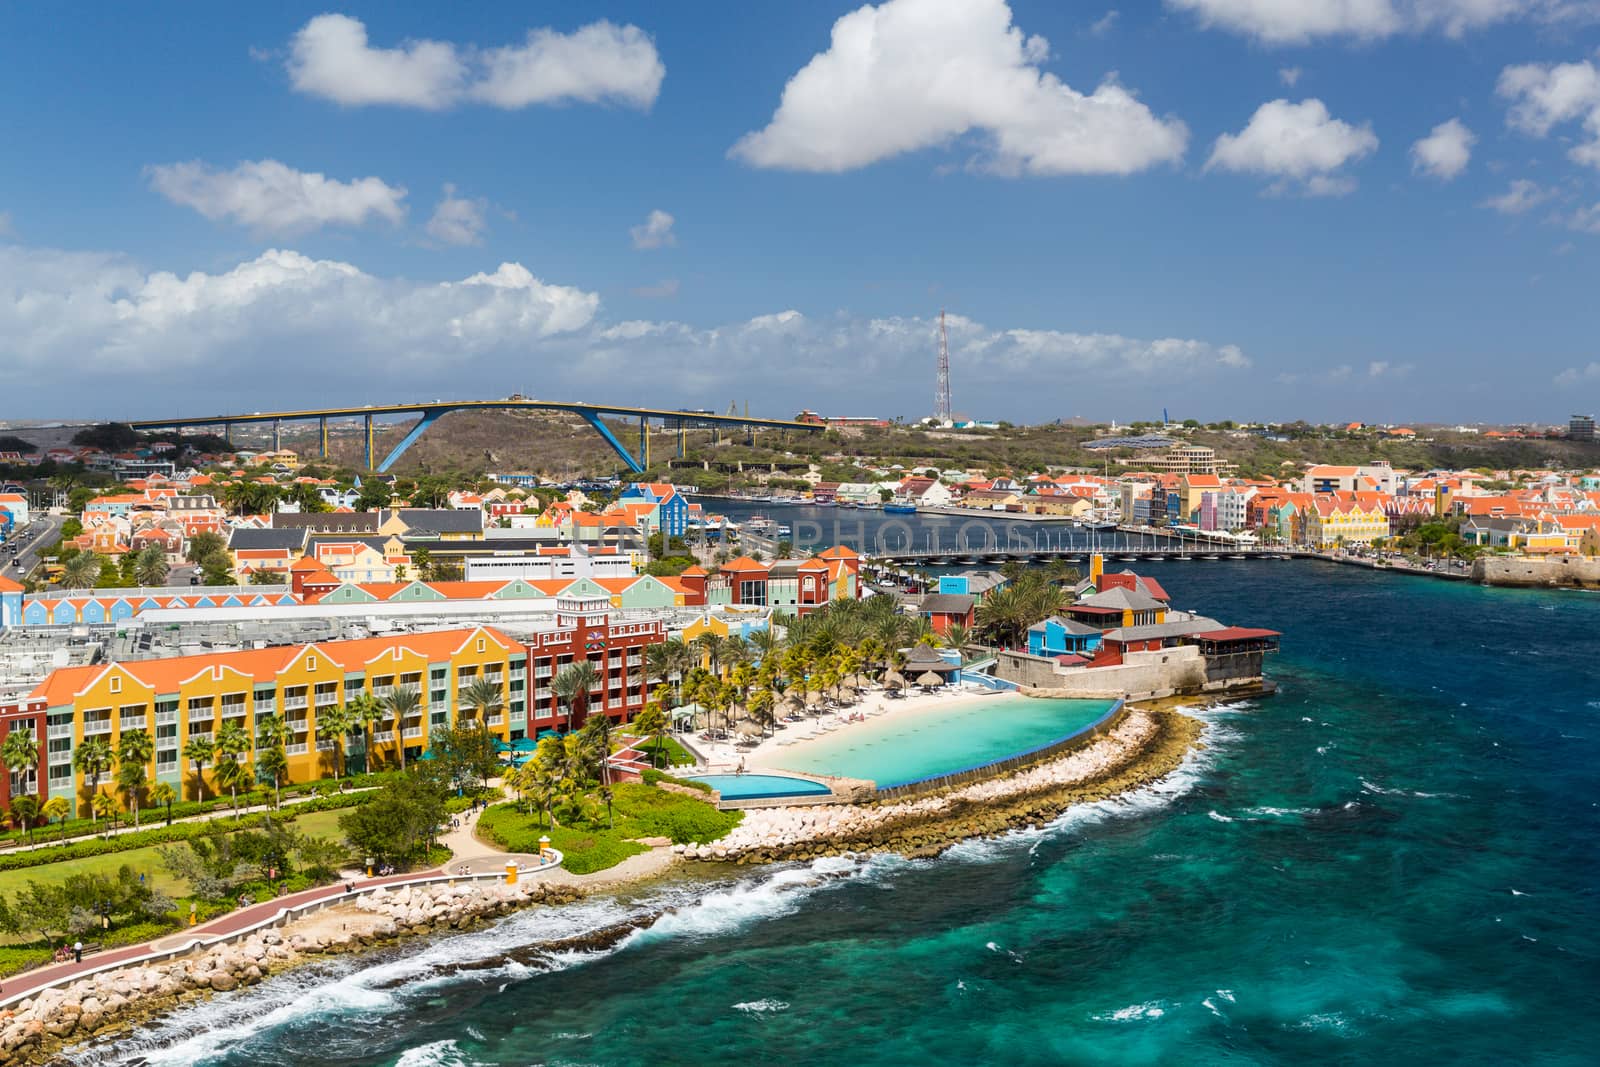 Willemstad in Curacao and the Queen Emma Bridge by chrisukphoto